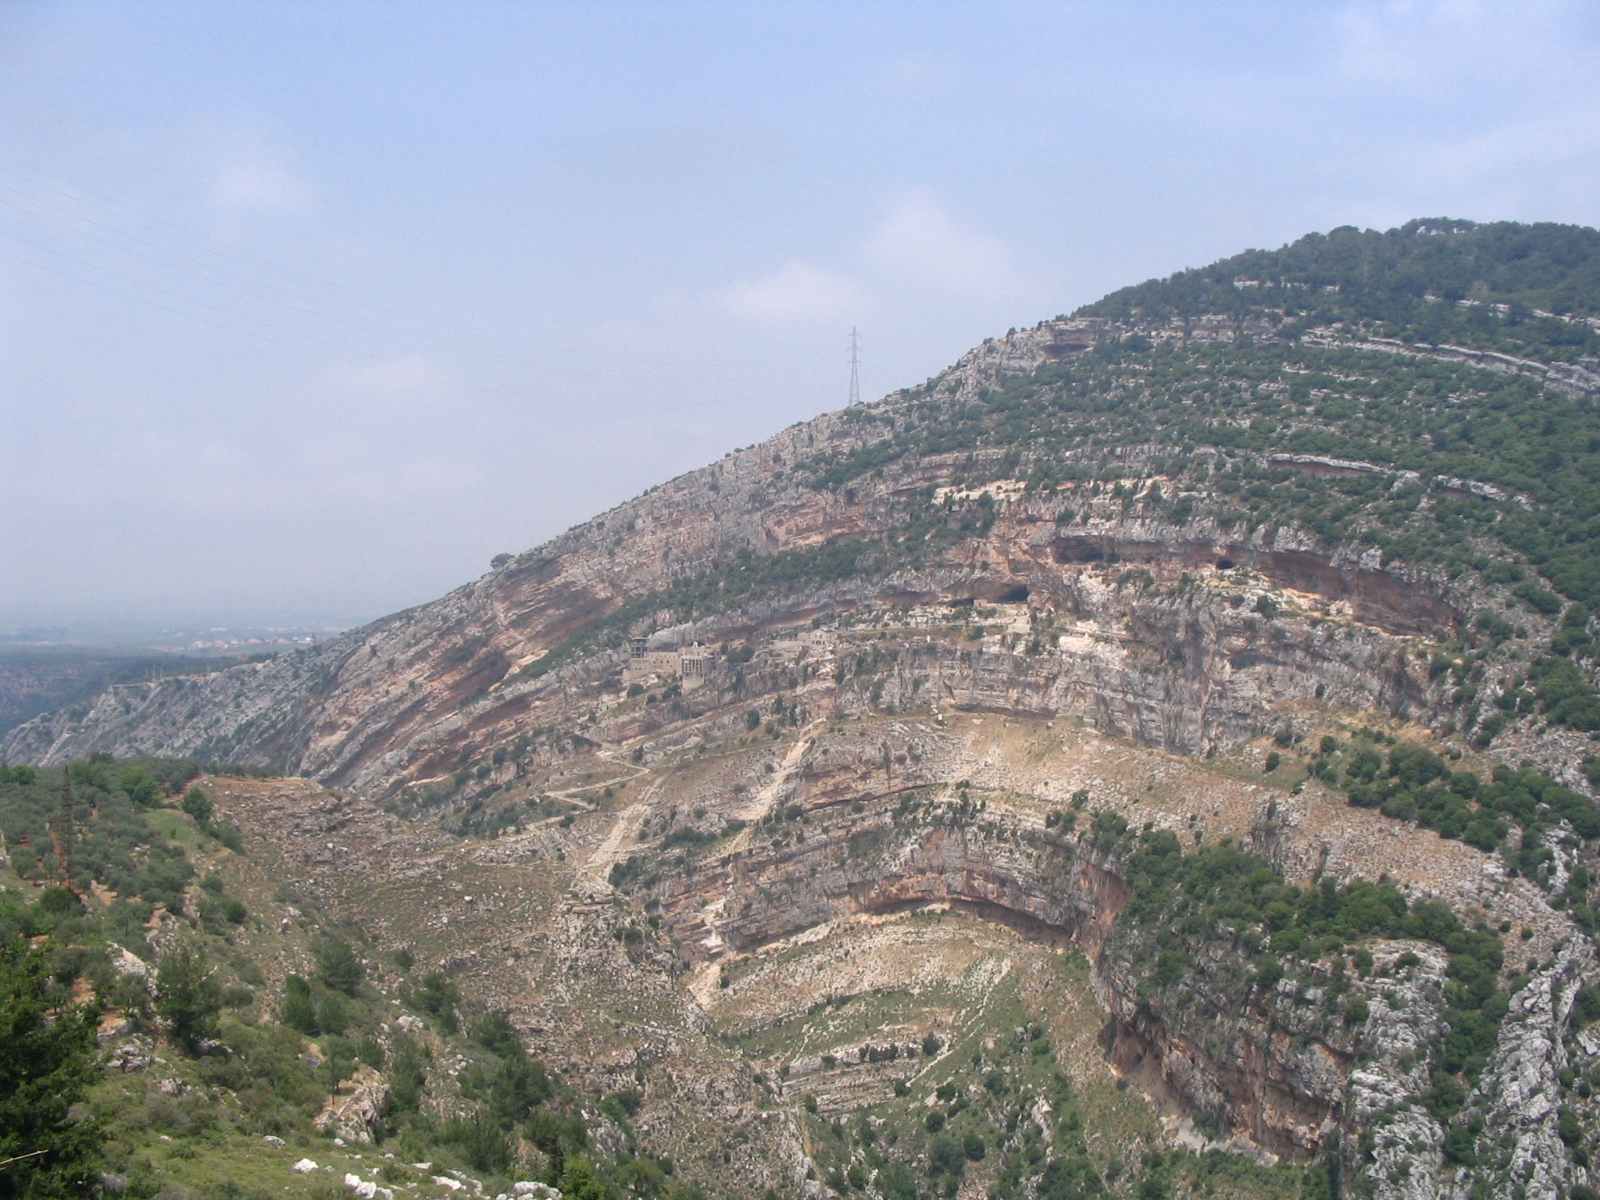 The rock beds are dipping in opposite directions on either side of the anticline's axis.